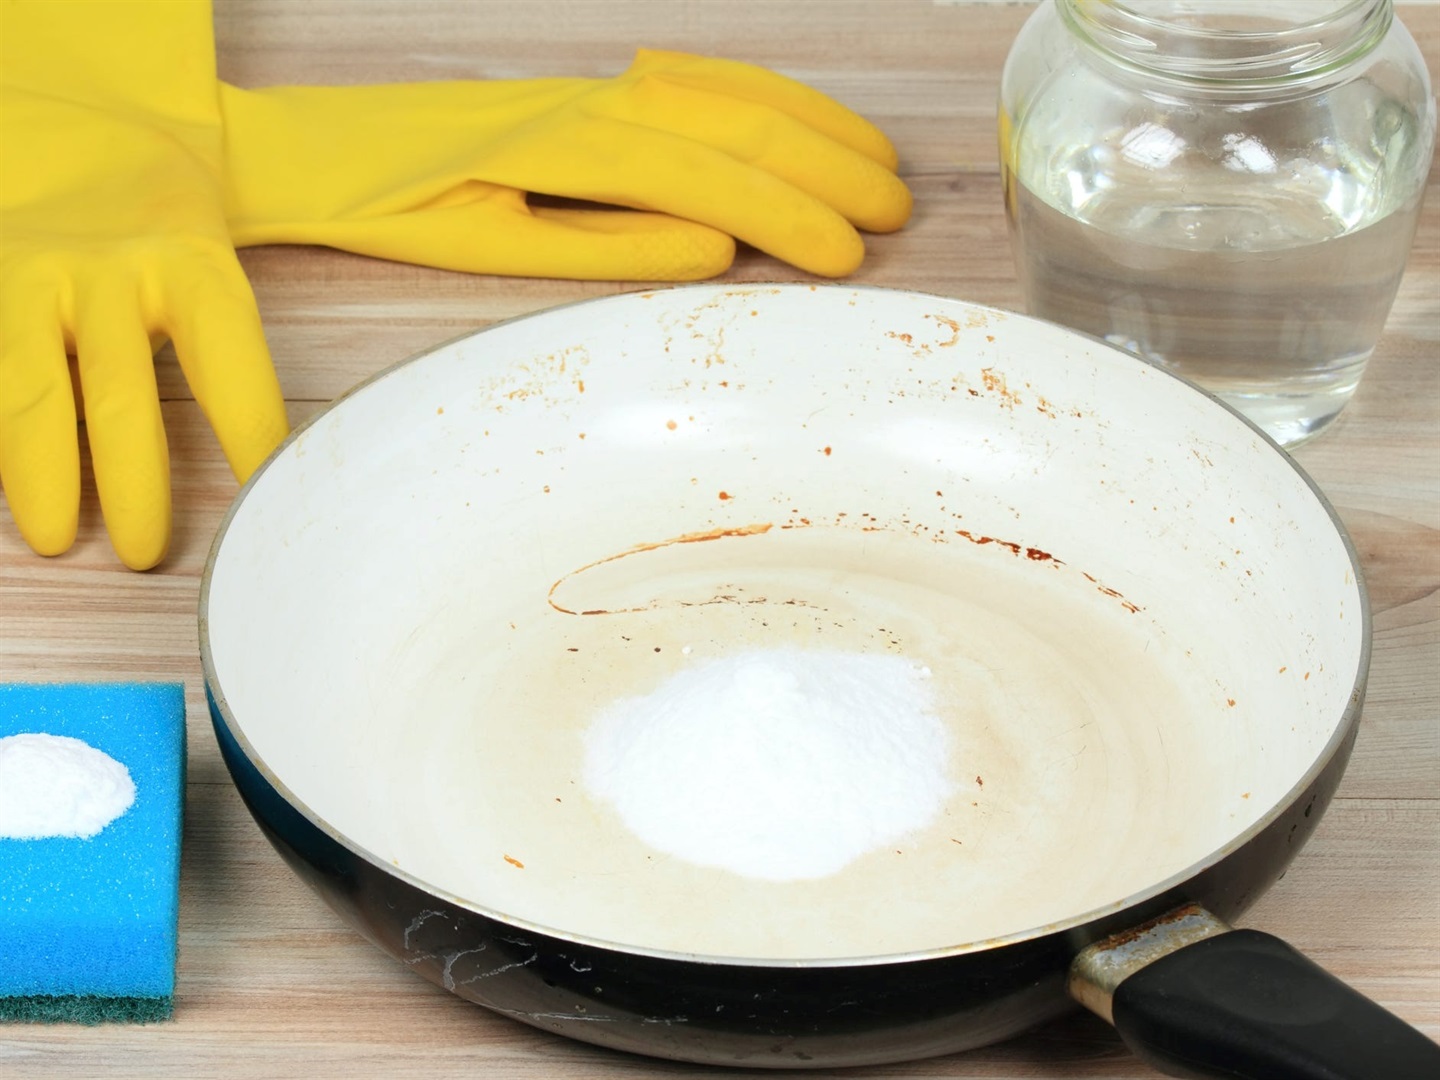 Baking soda serves as a scouring agent to scrub away stuck-on debris. svehlik/Getty Images